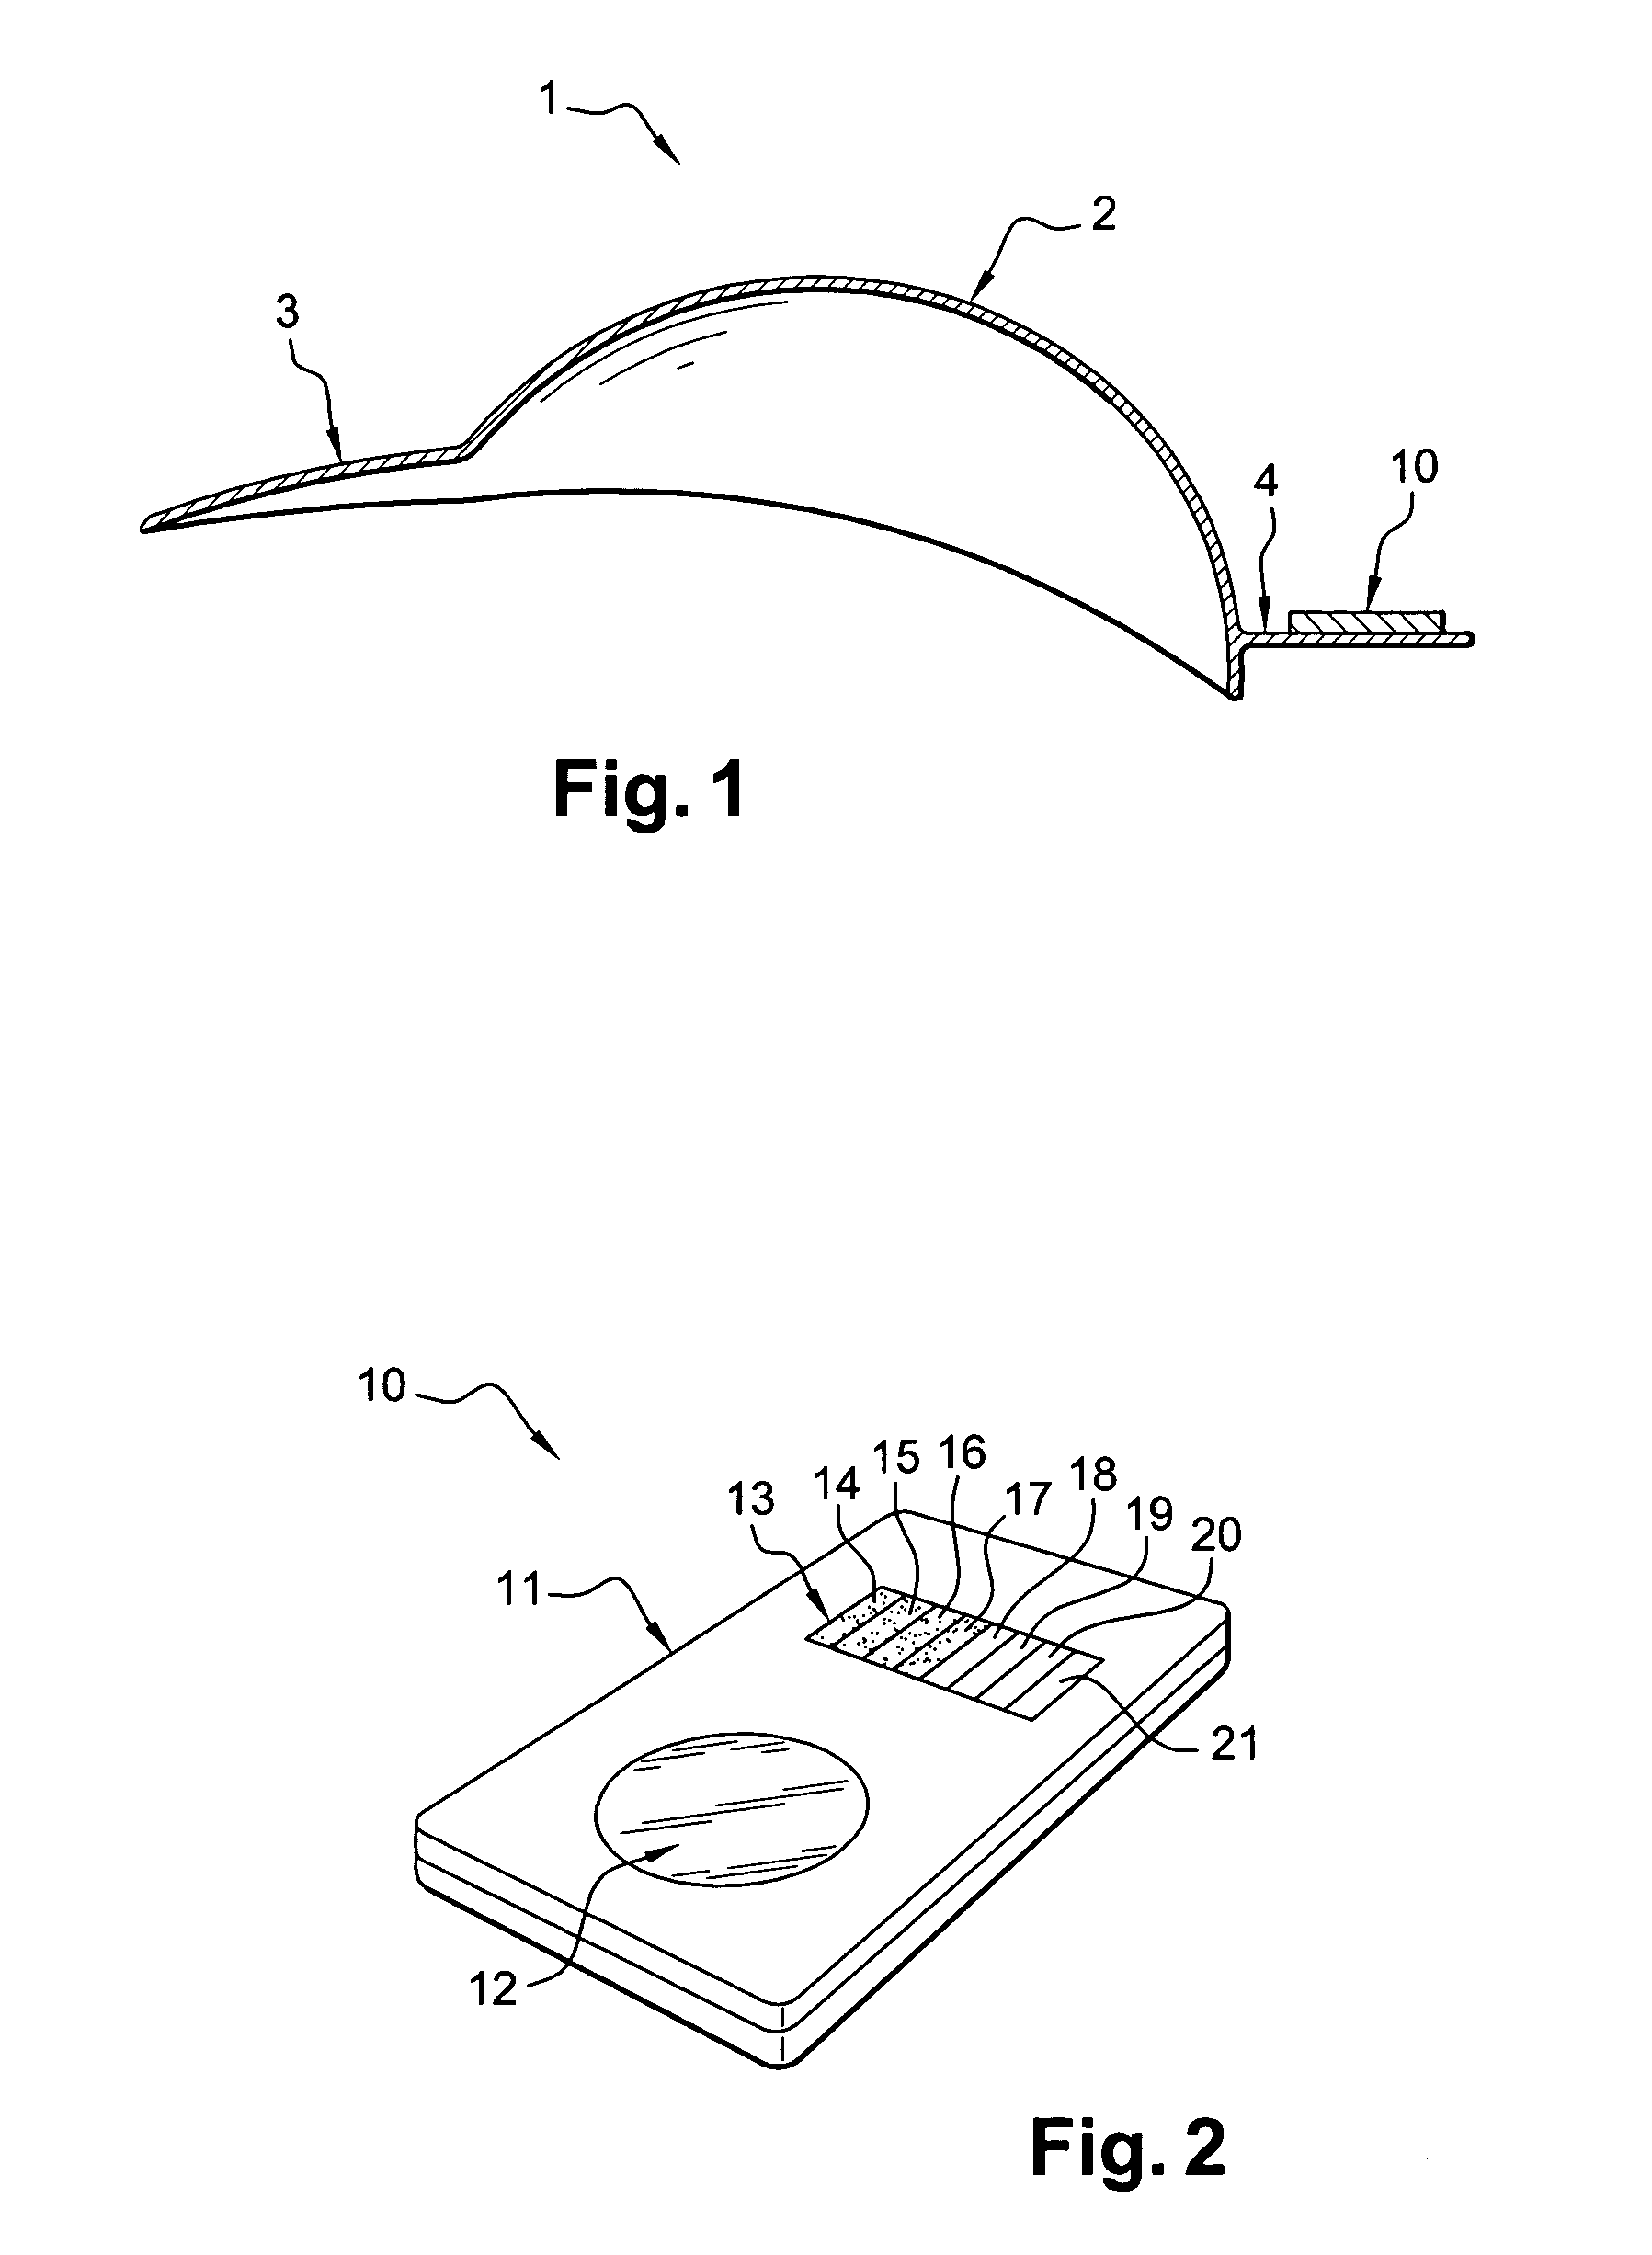 Device to prevent the risk of overexposure to harmful solar radiation